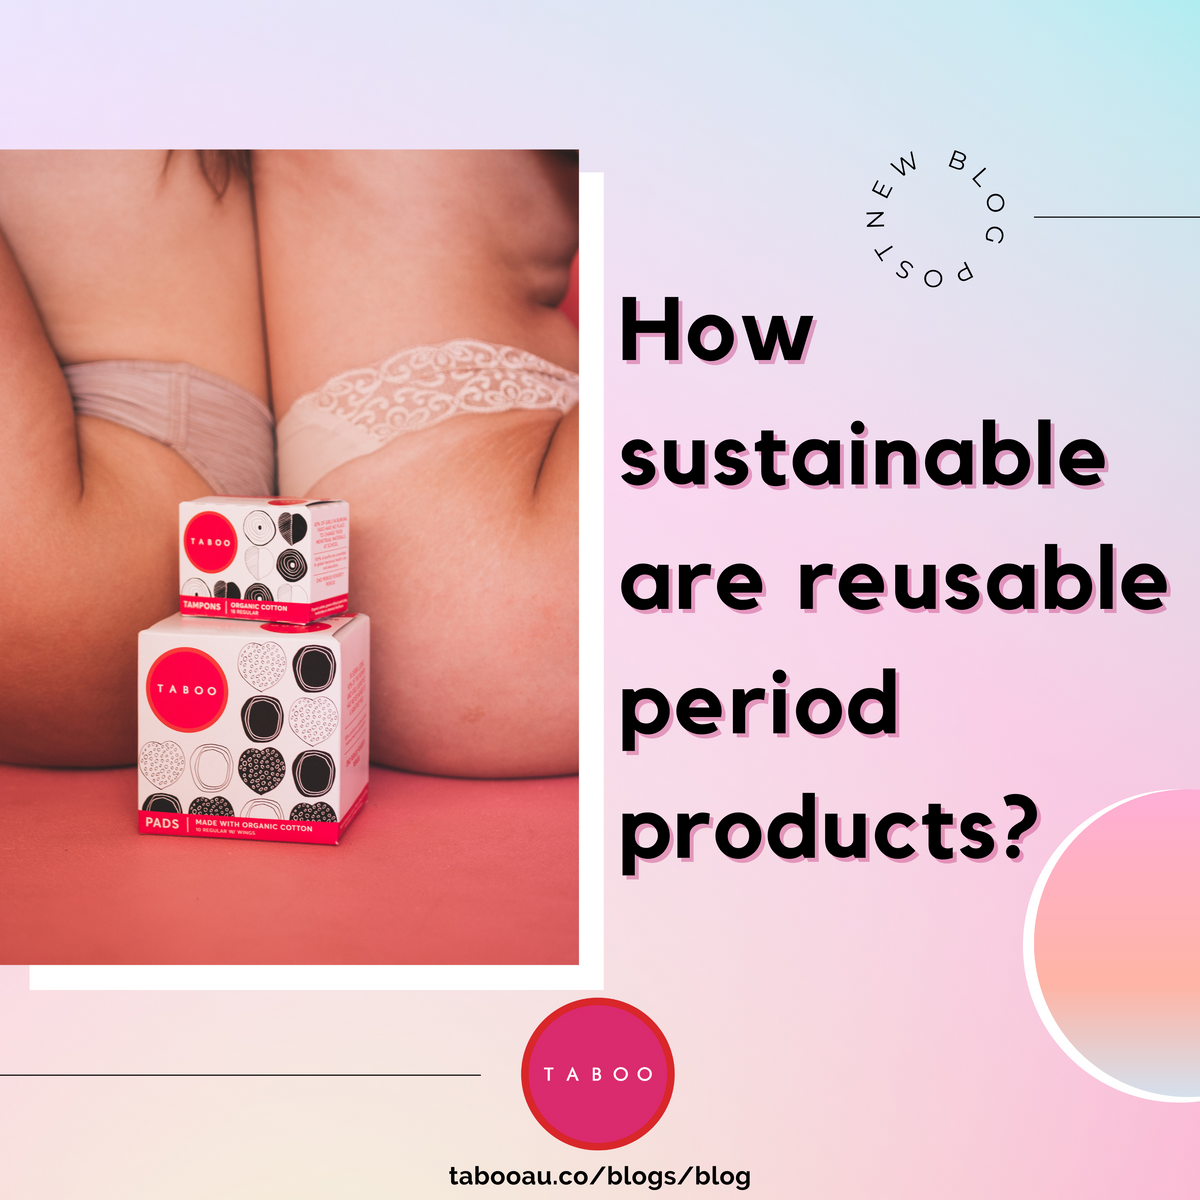 Reusable Menstrual Cups, Pads, & Underwear for Eco-Friendly Period